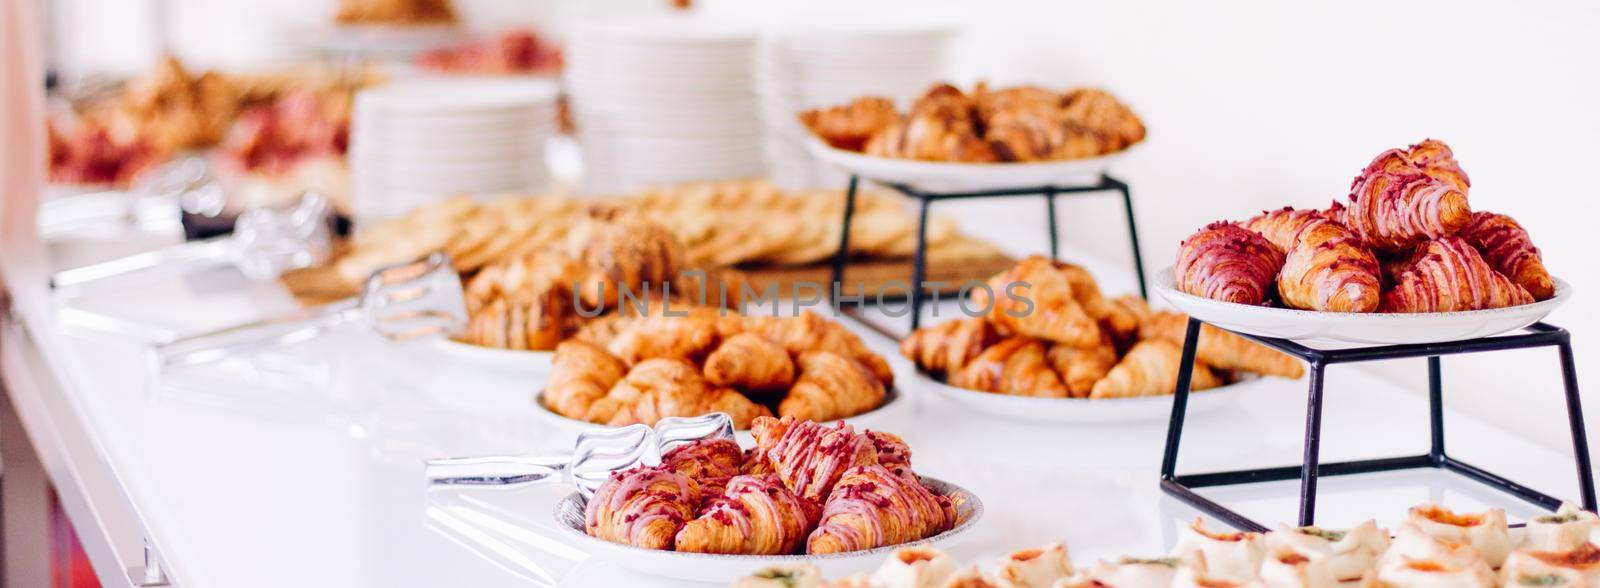 Pastry, cookies and croissants, sweet desserts served at charity event, holiday background banner for luxury brand design by Anneleven